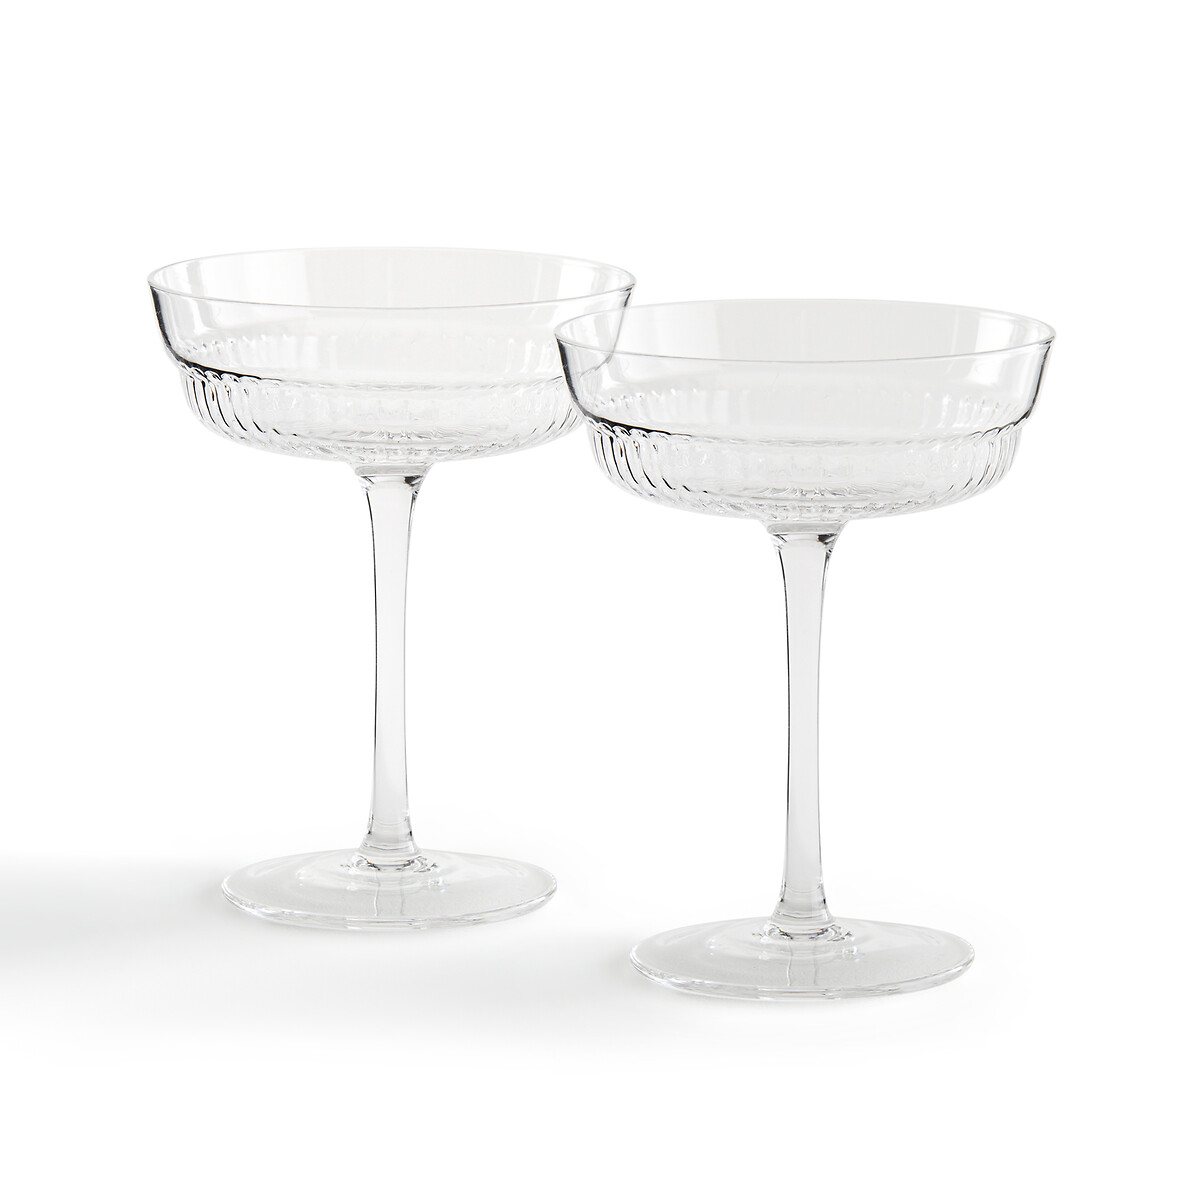 Set of 2 Rigato Textured Champagne Coupes